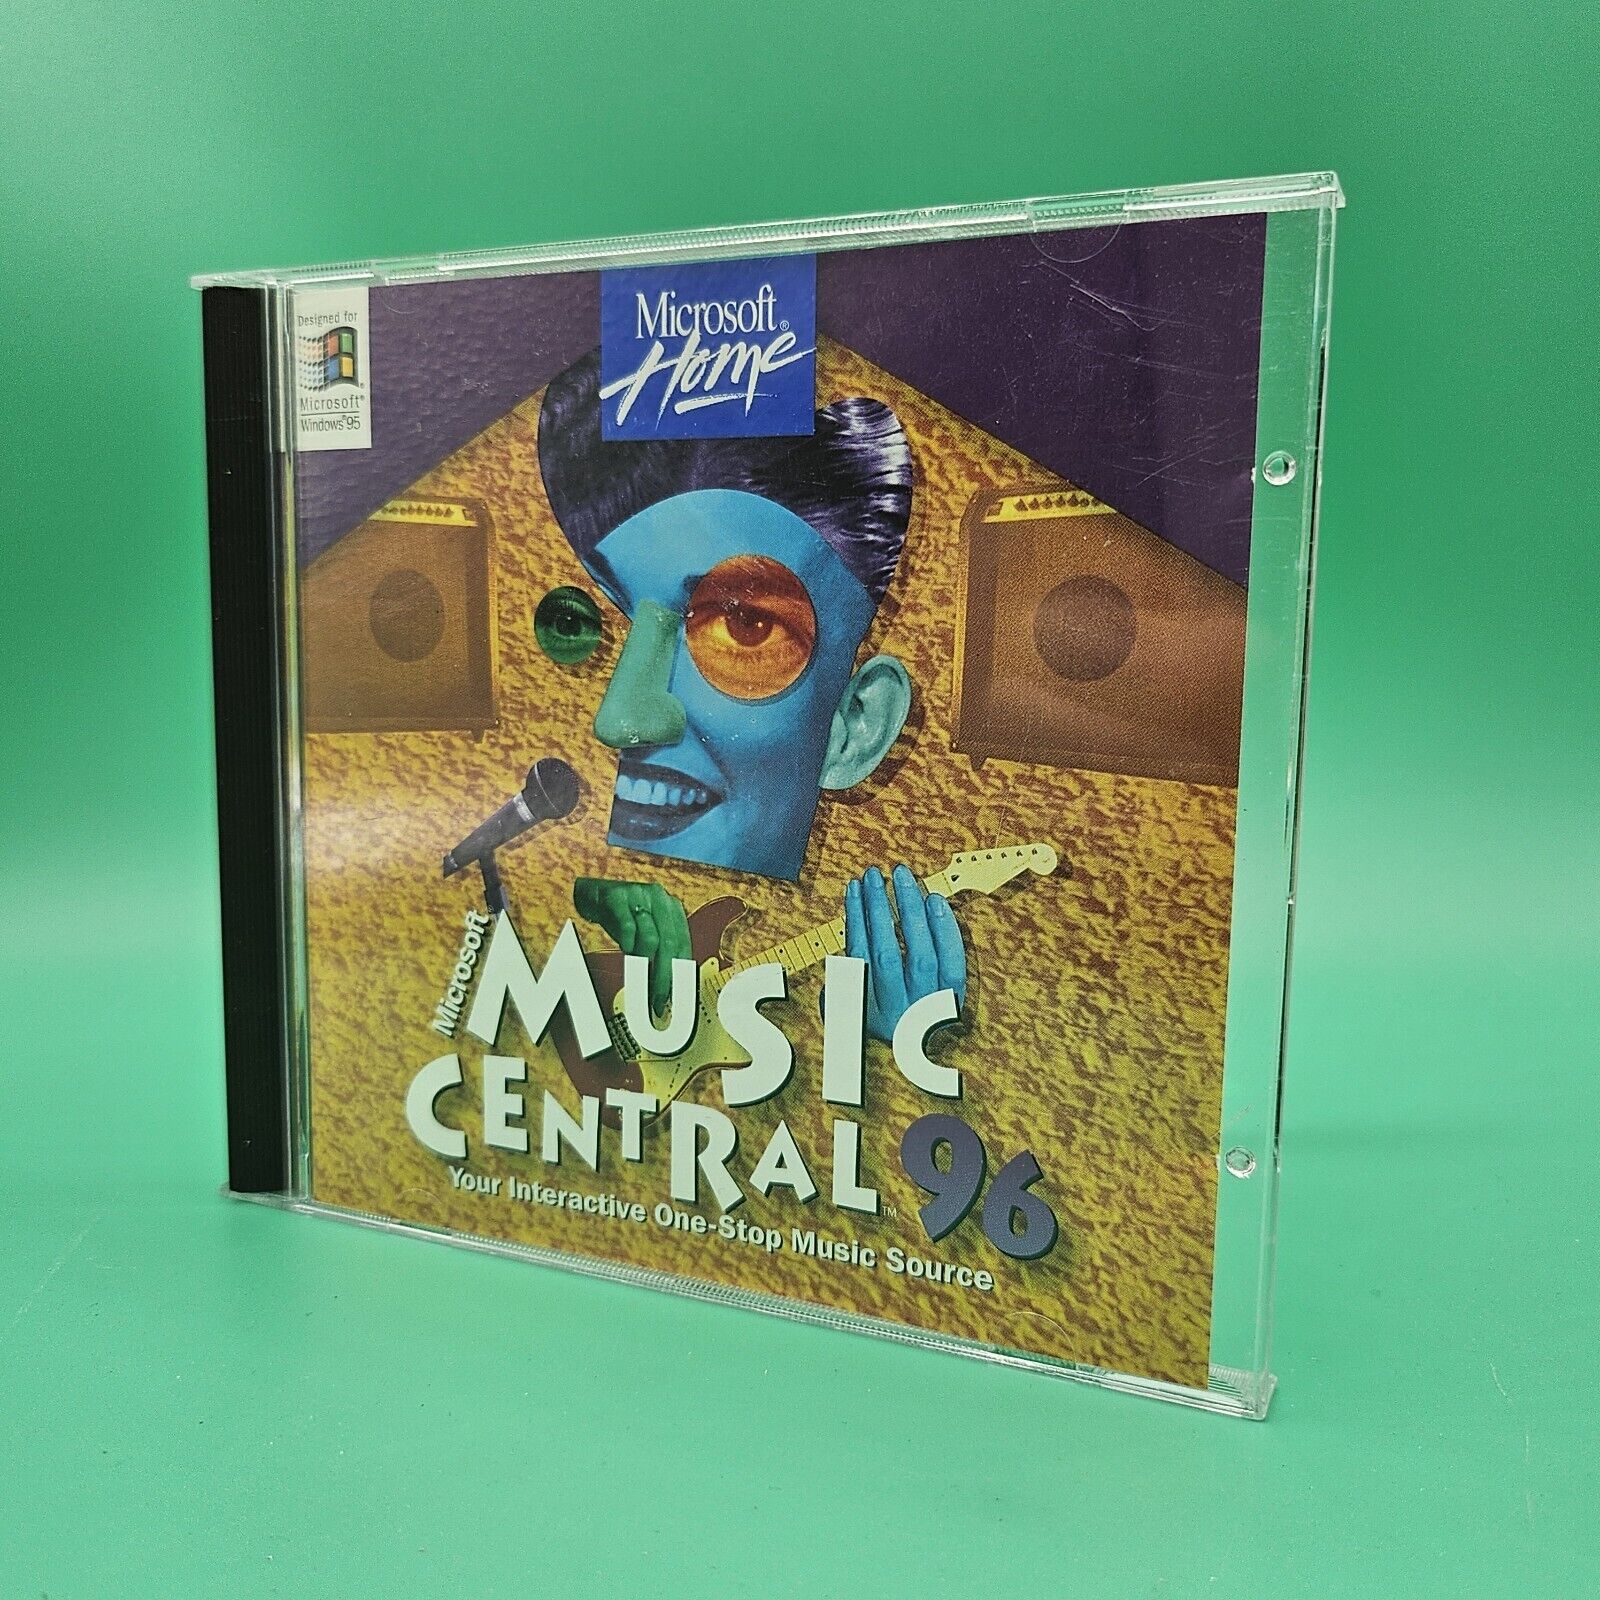 Microsoft Music Central 96 - Microsoft Home  CD-ROM - COMPLETE VG+ Vintage Game